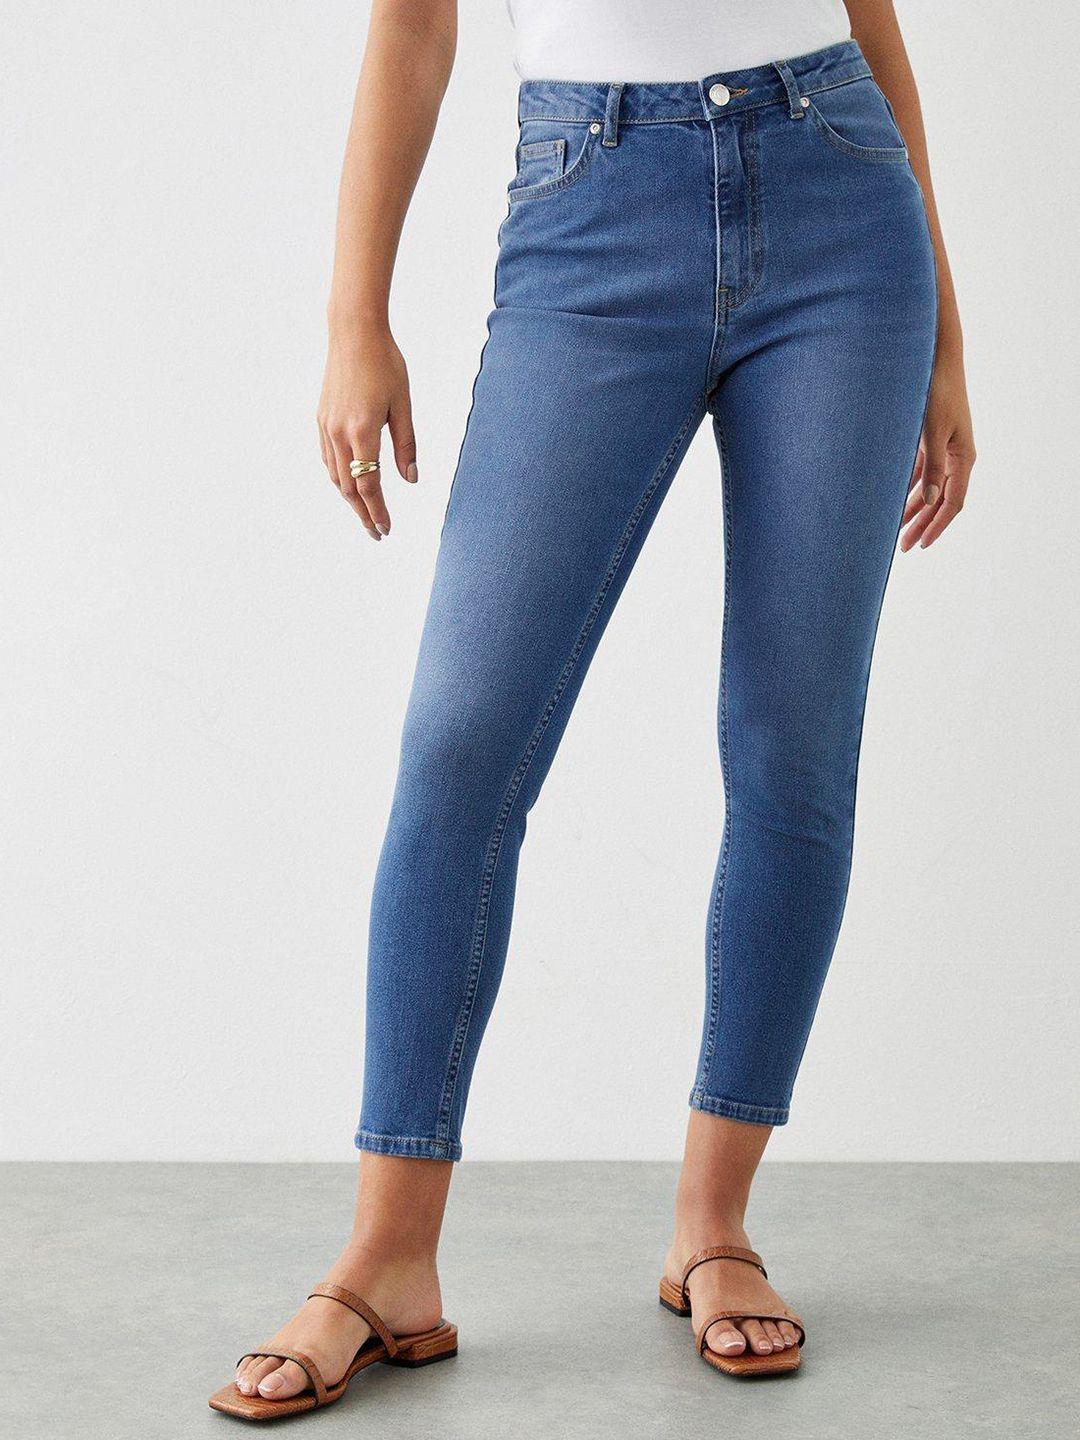 dorothy perkins women skinny fit high-rise jeans